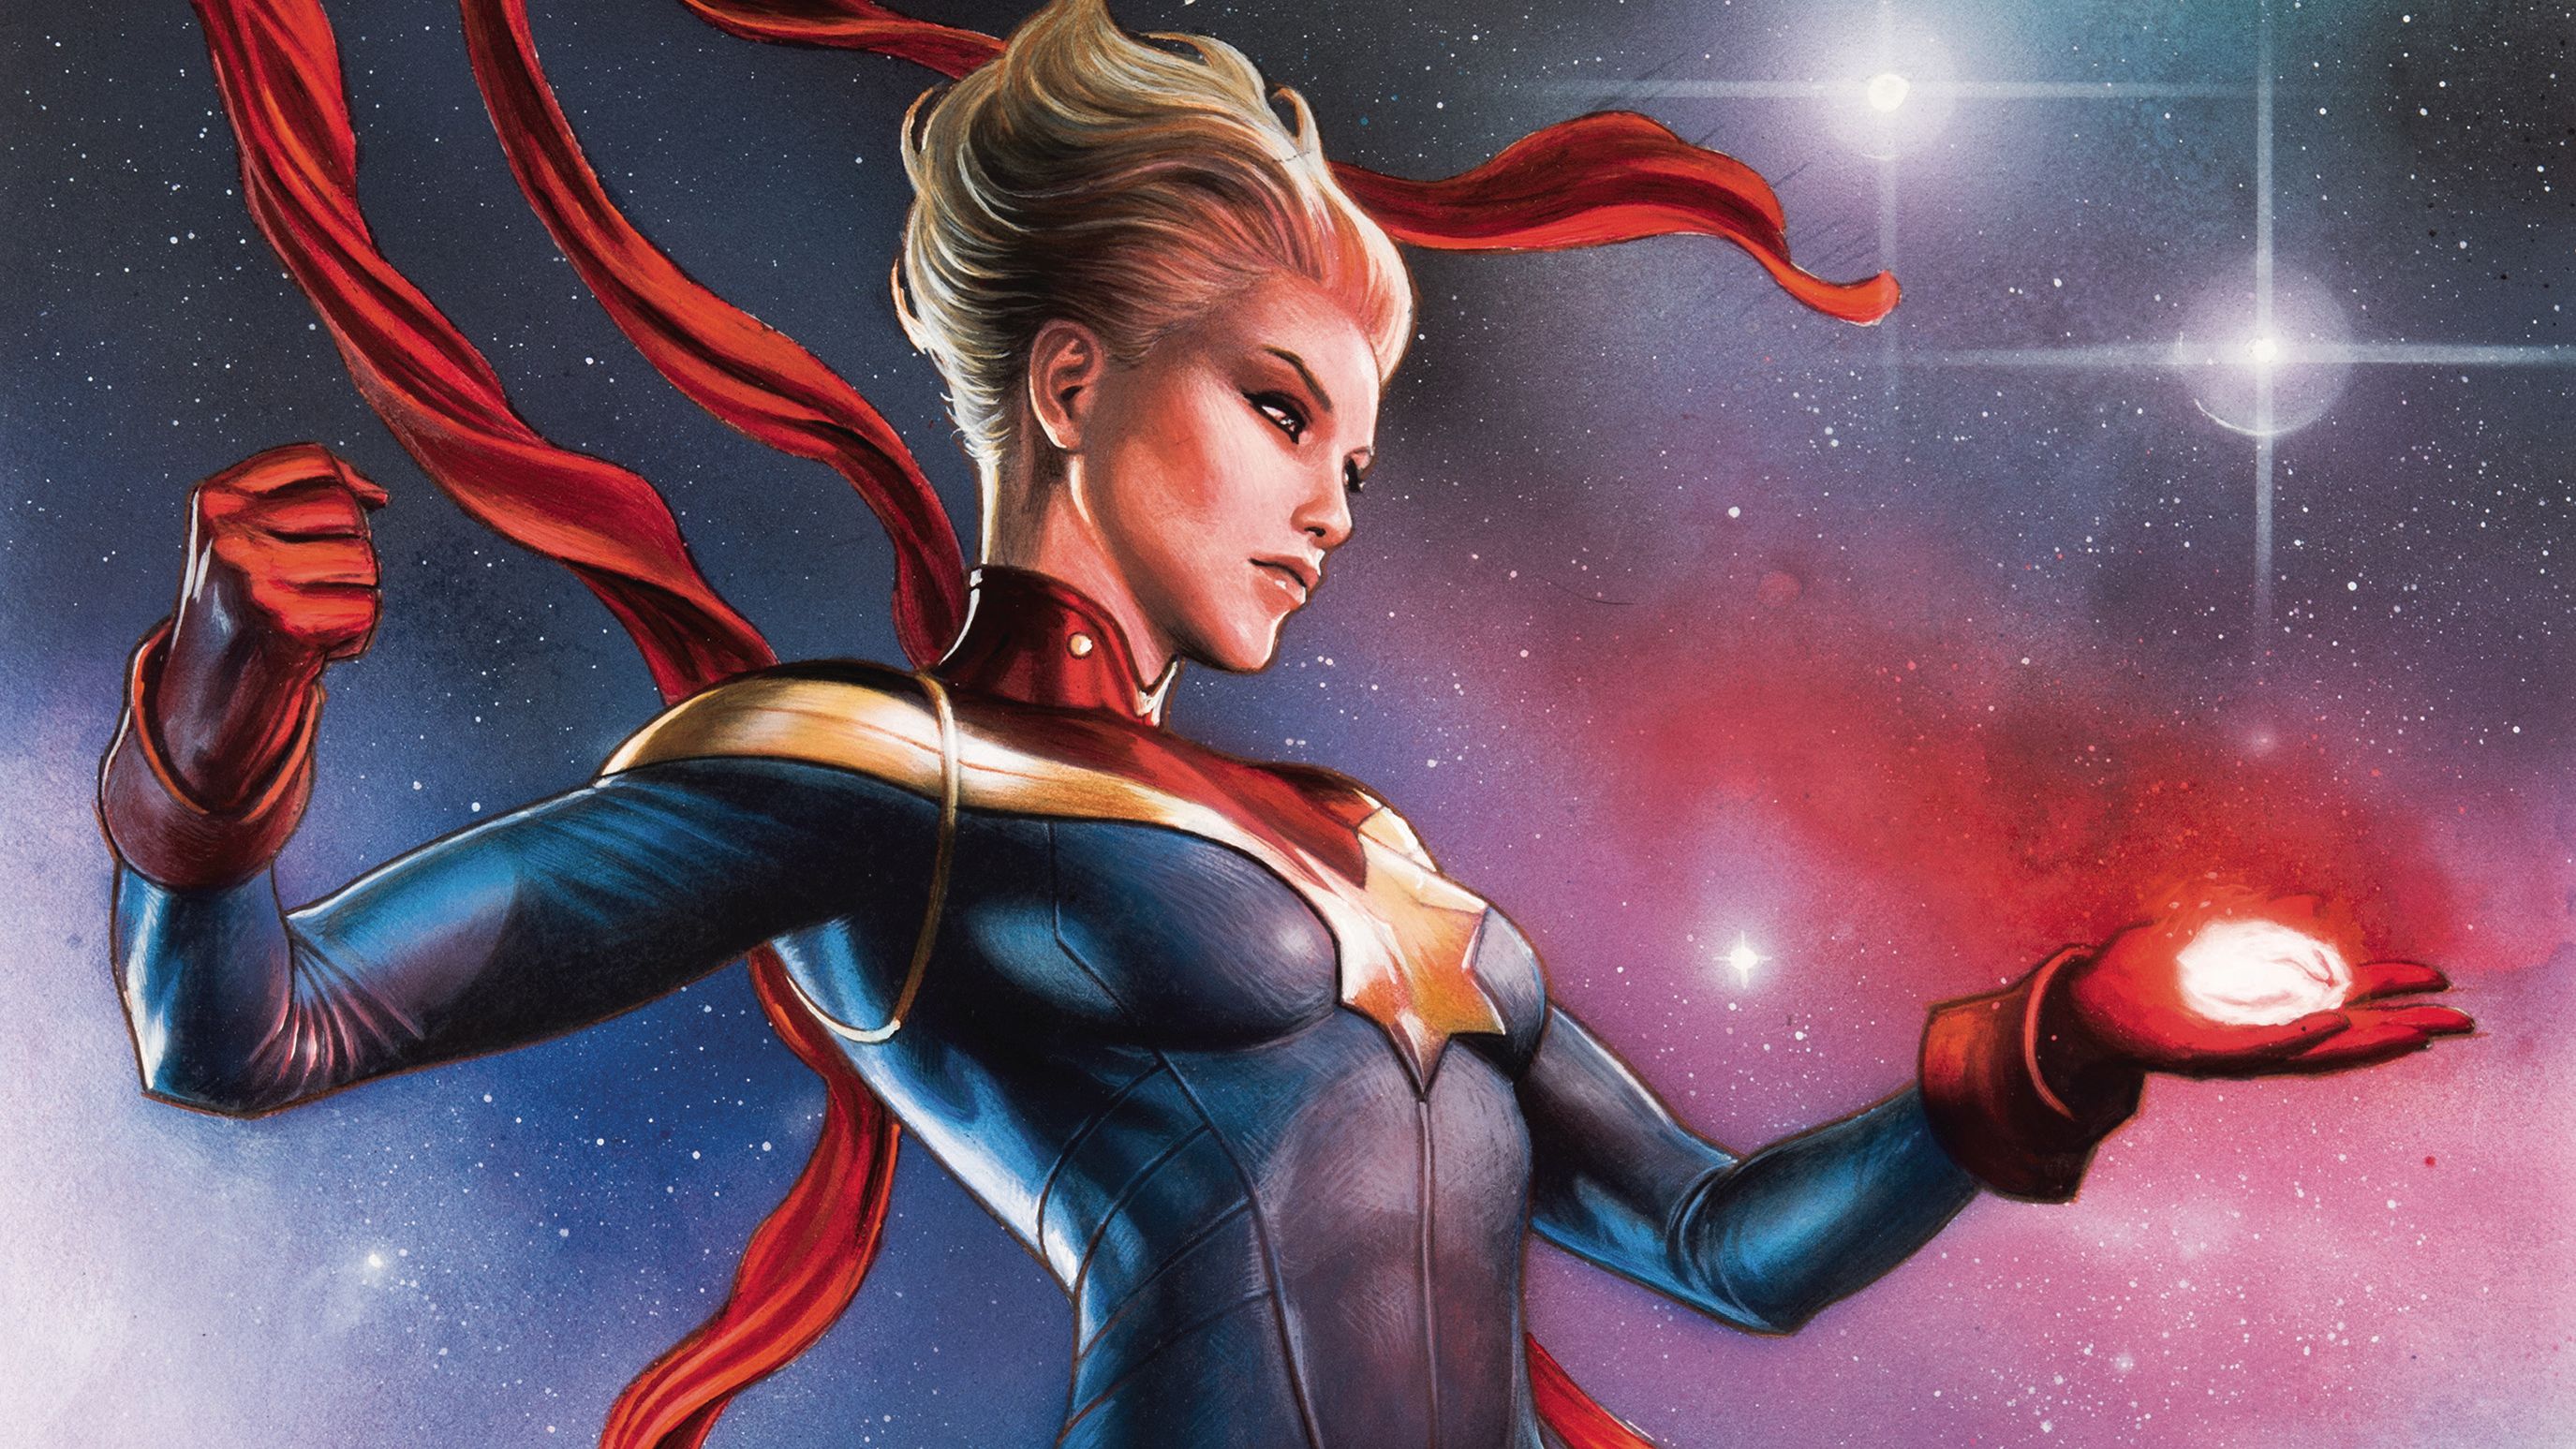 Captain Marvel Comic Book Art, HD Superheroes, 4k Wallpaper, Image, Background, Photo and Picture